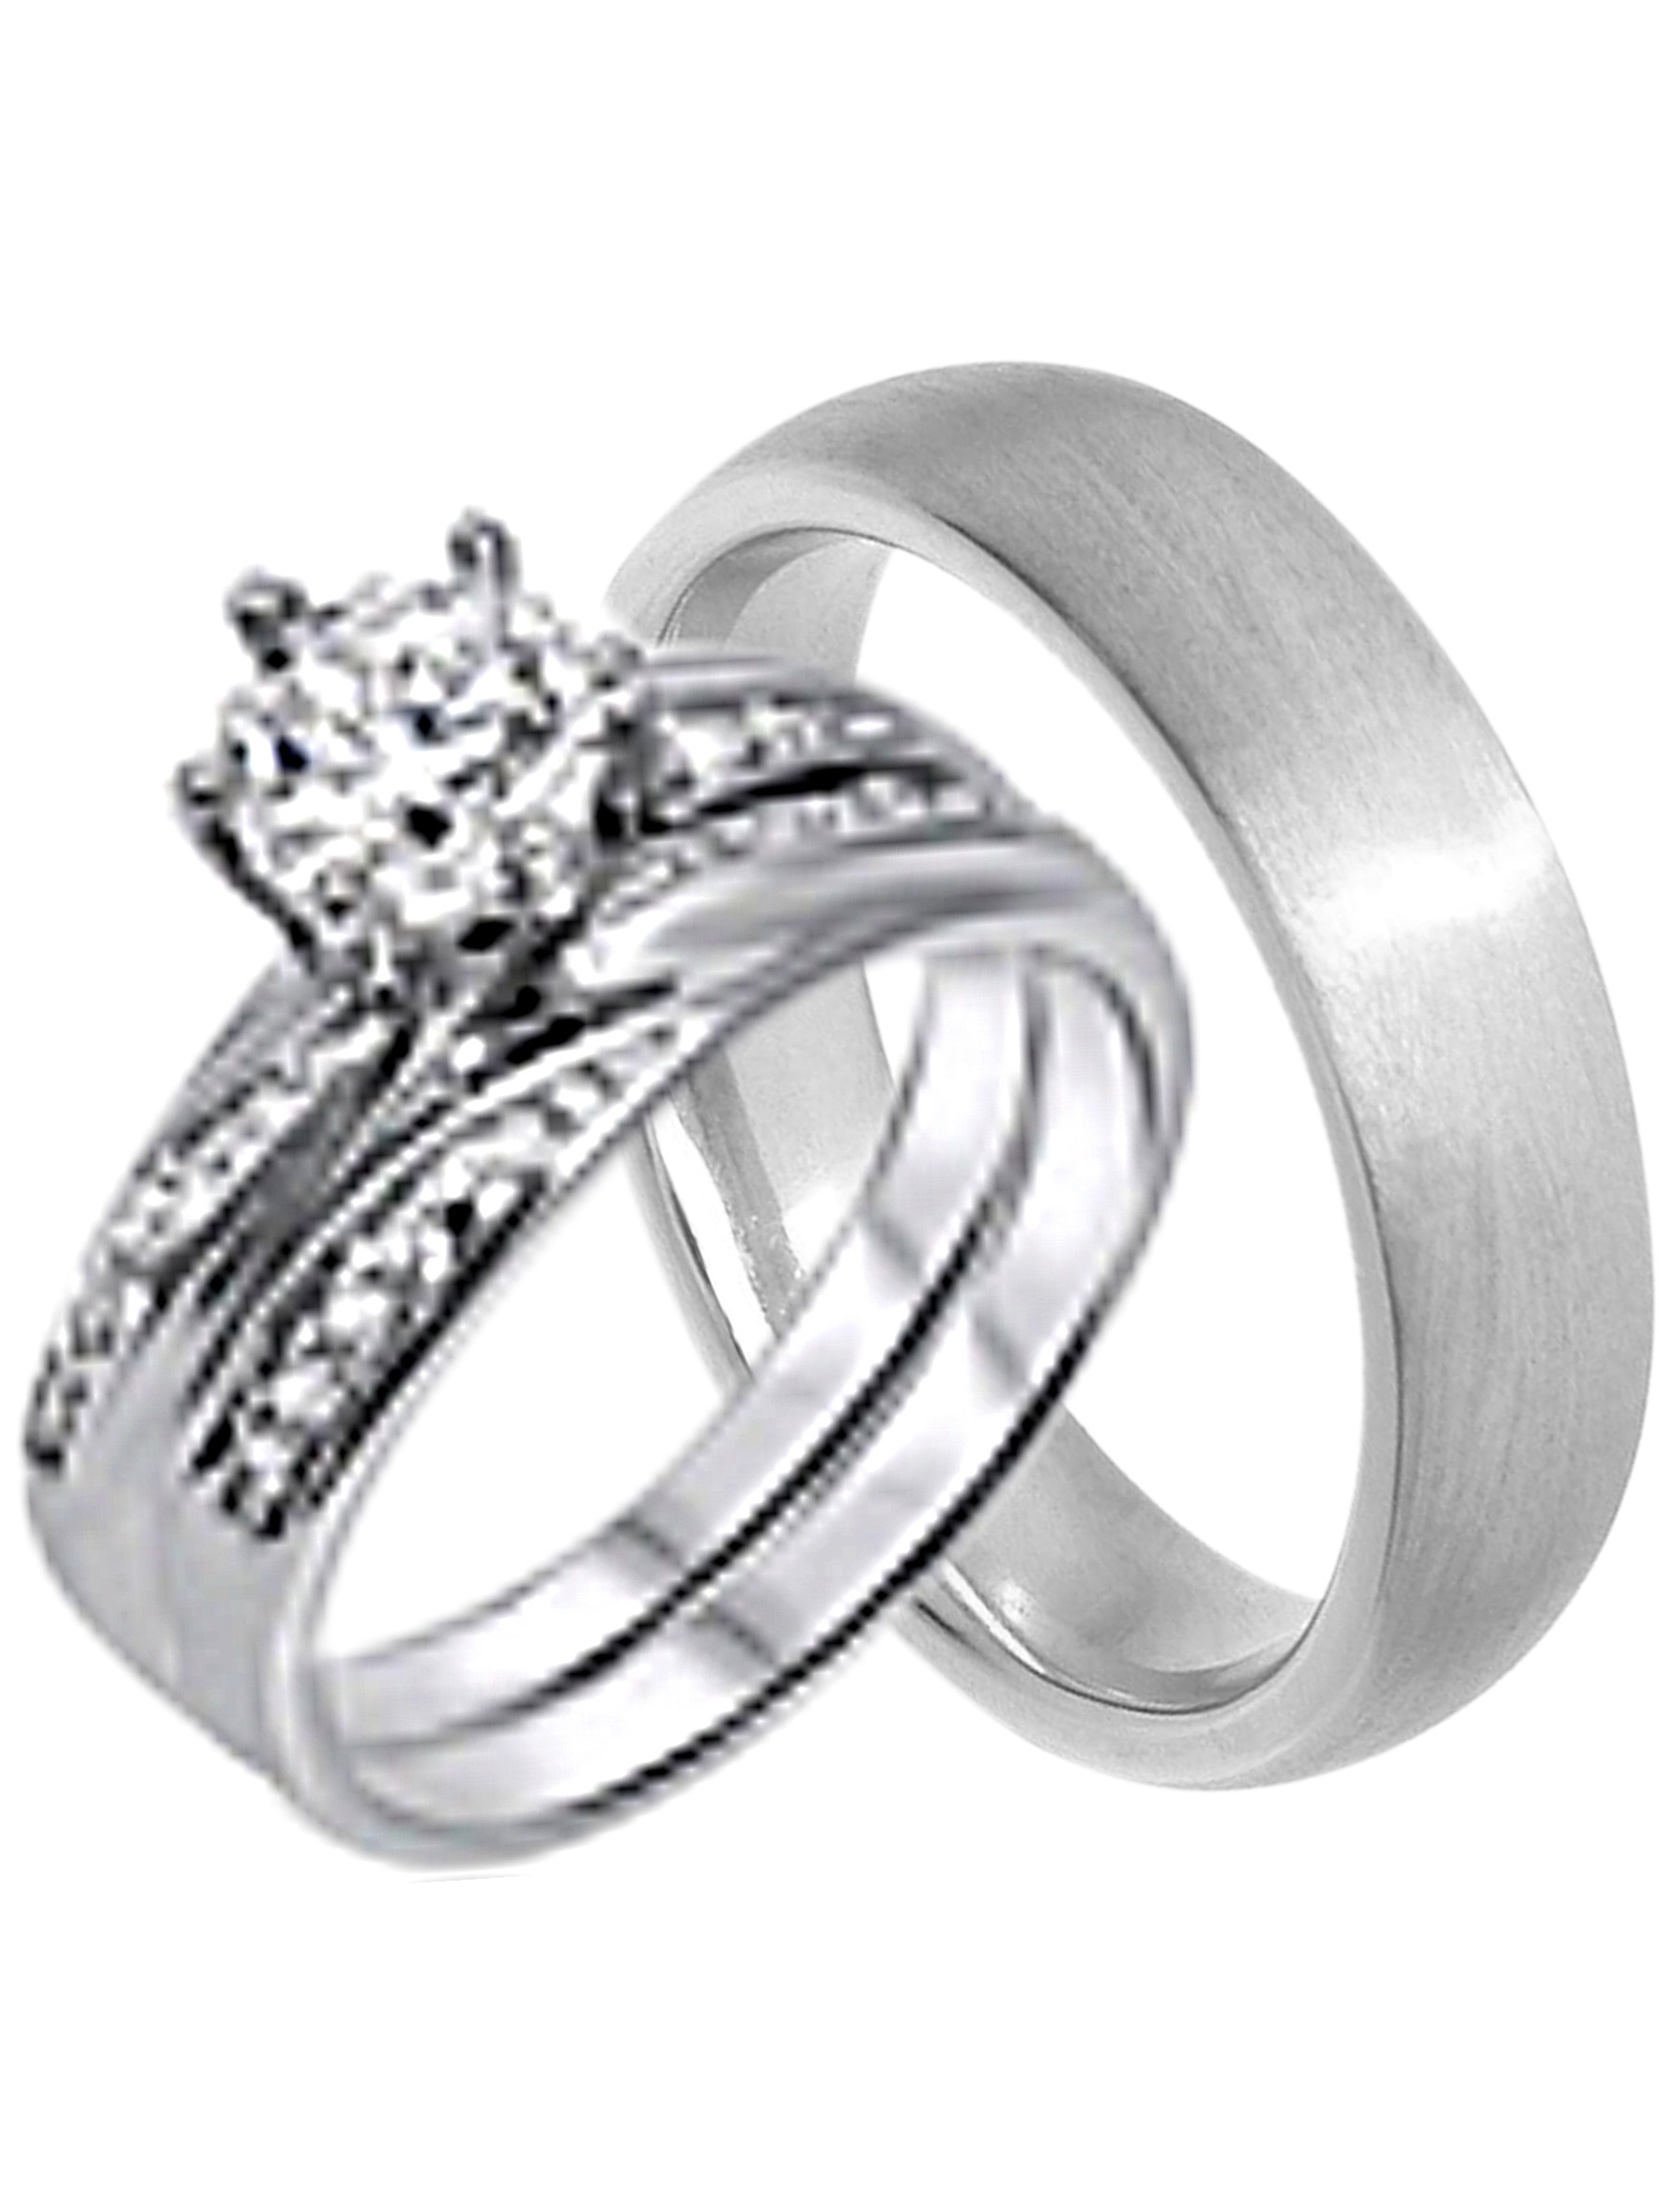 Discount Wedding Rings
 His and Hers Wedding Ring Set Cheap Wedding Bands for Him